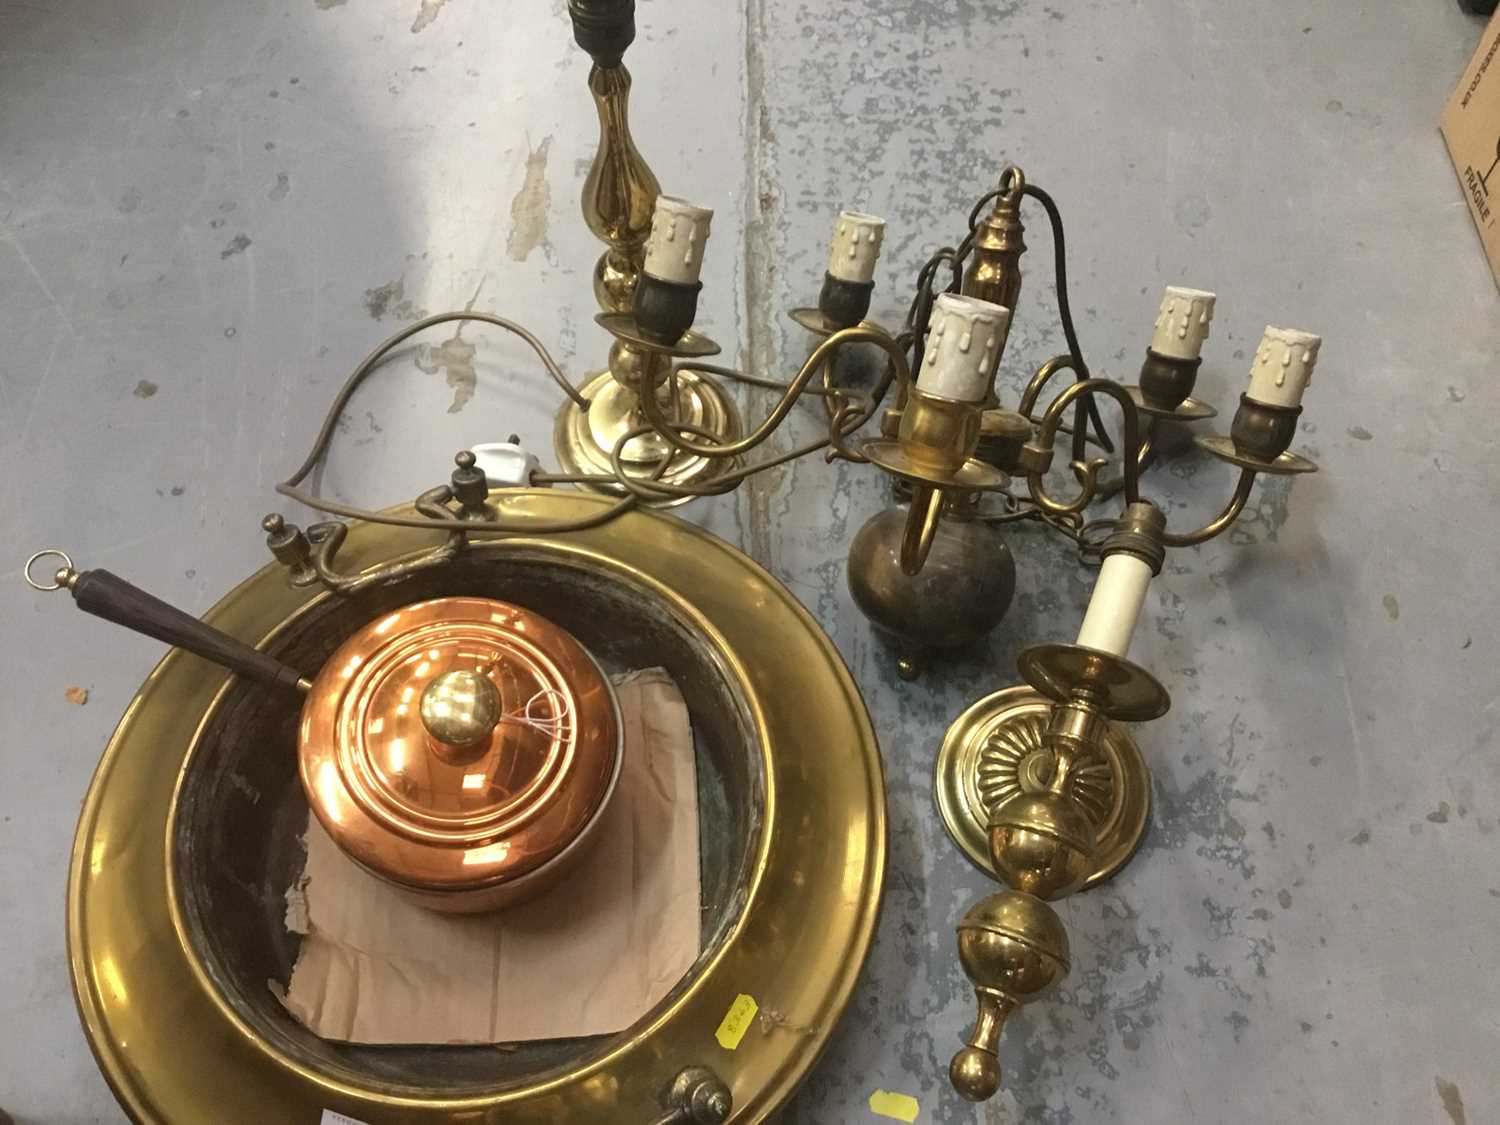 Old eastern brass brazier and other metalware